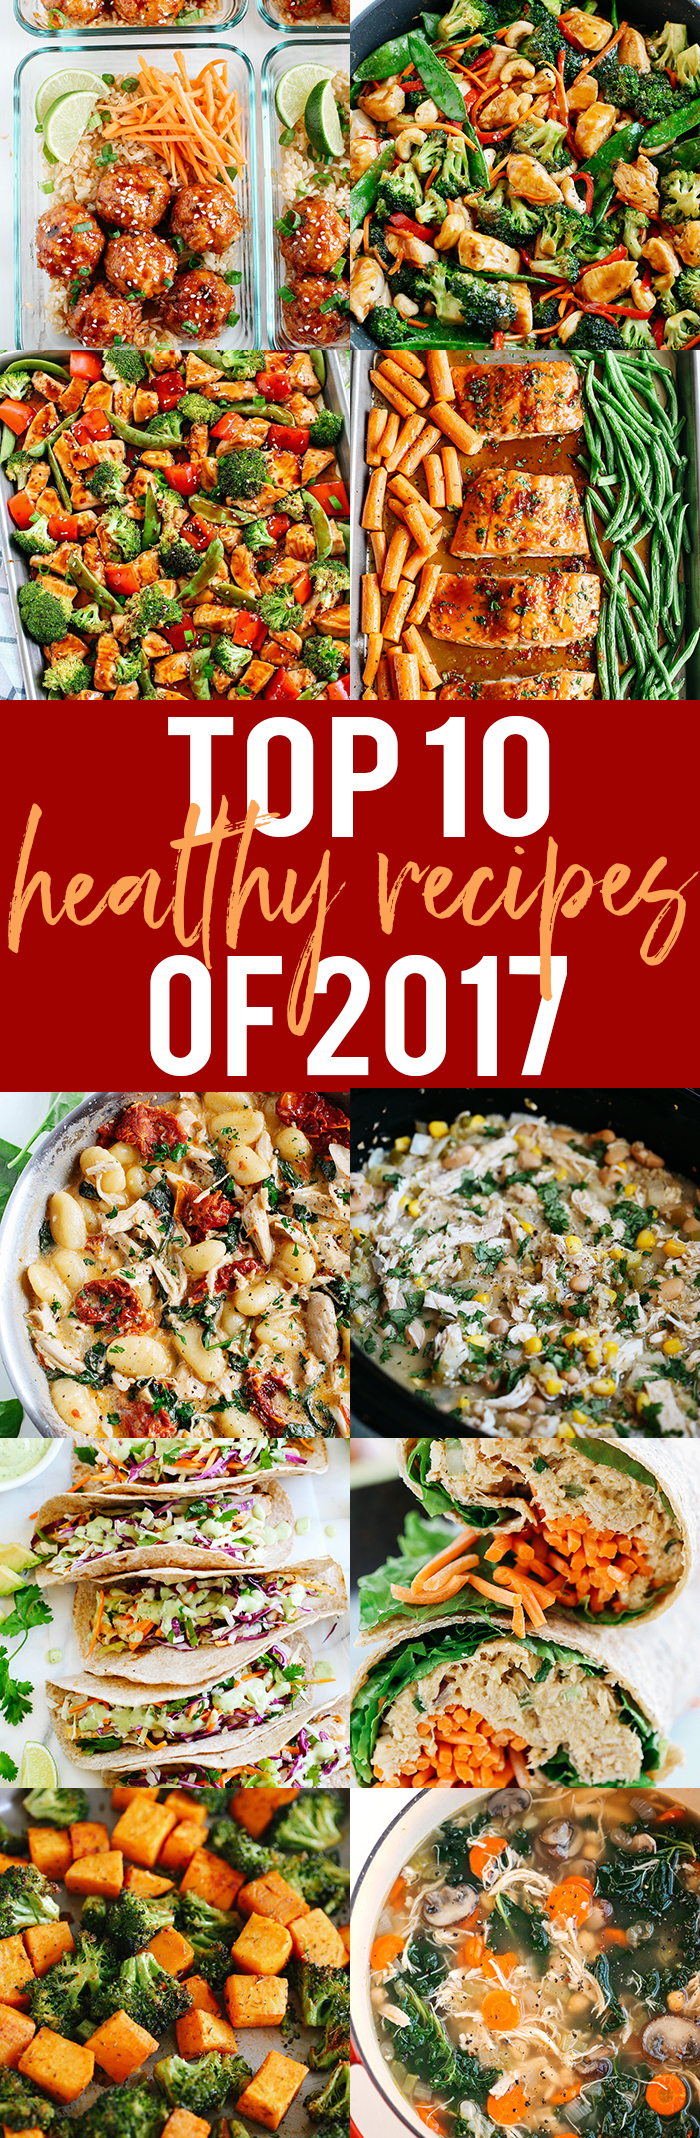 Top 10 Healthy Recipes from Eat Yourself Skinny in 2017!